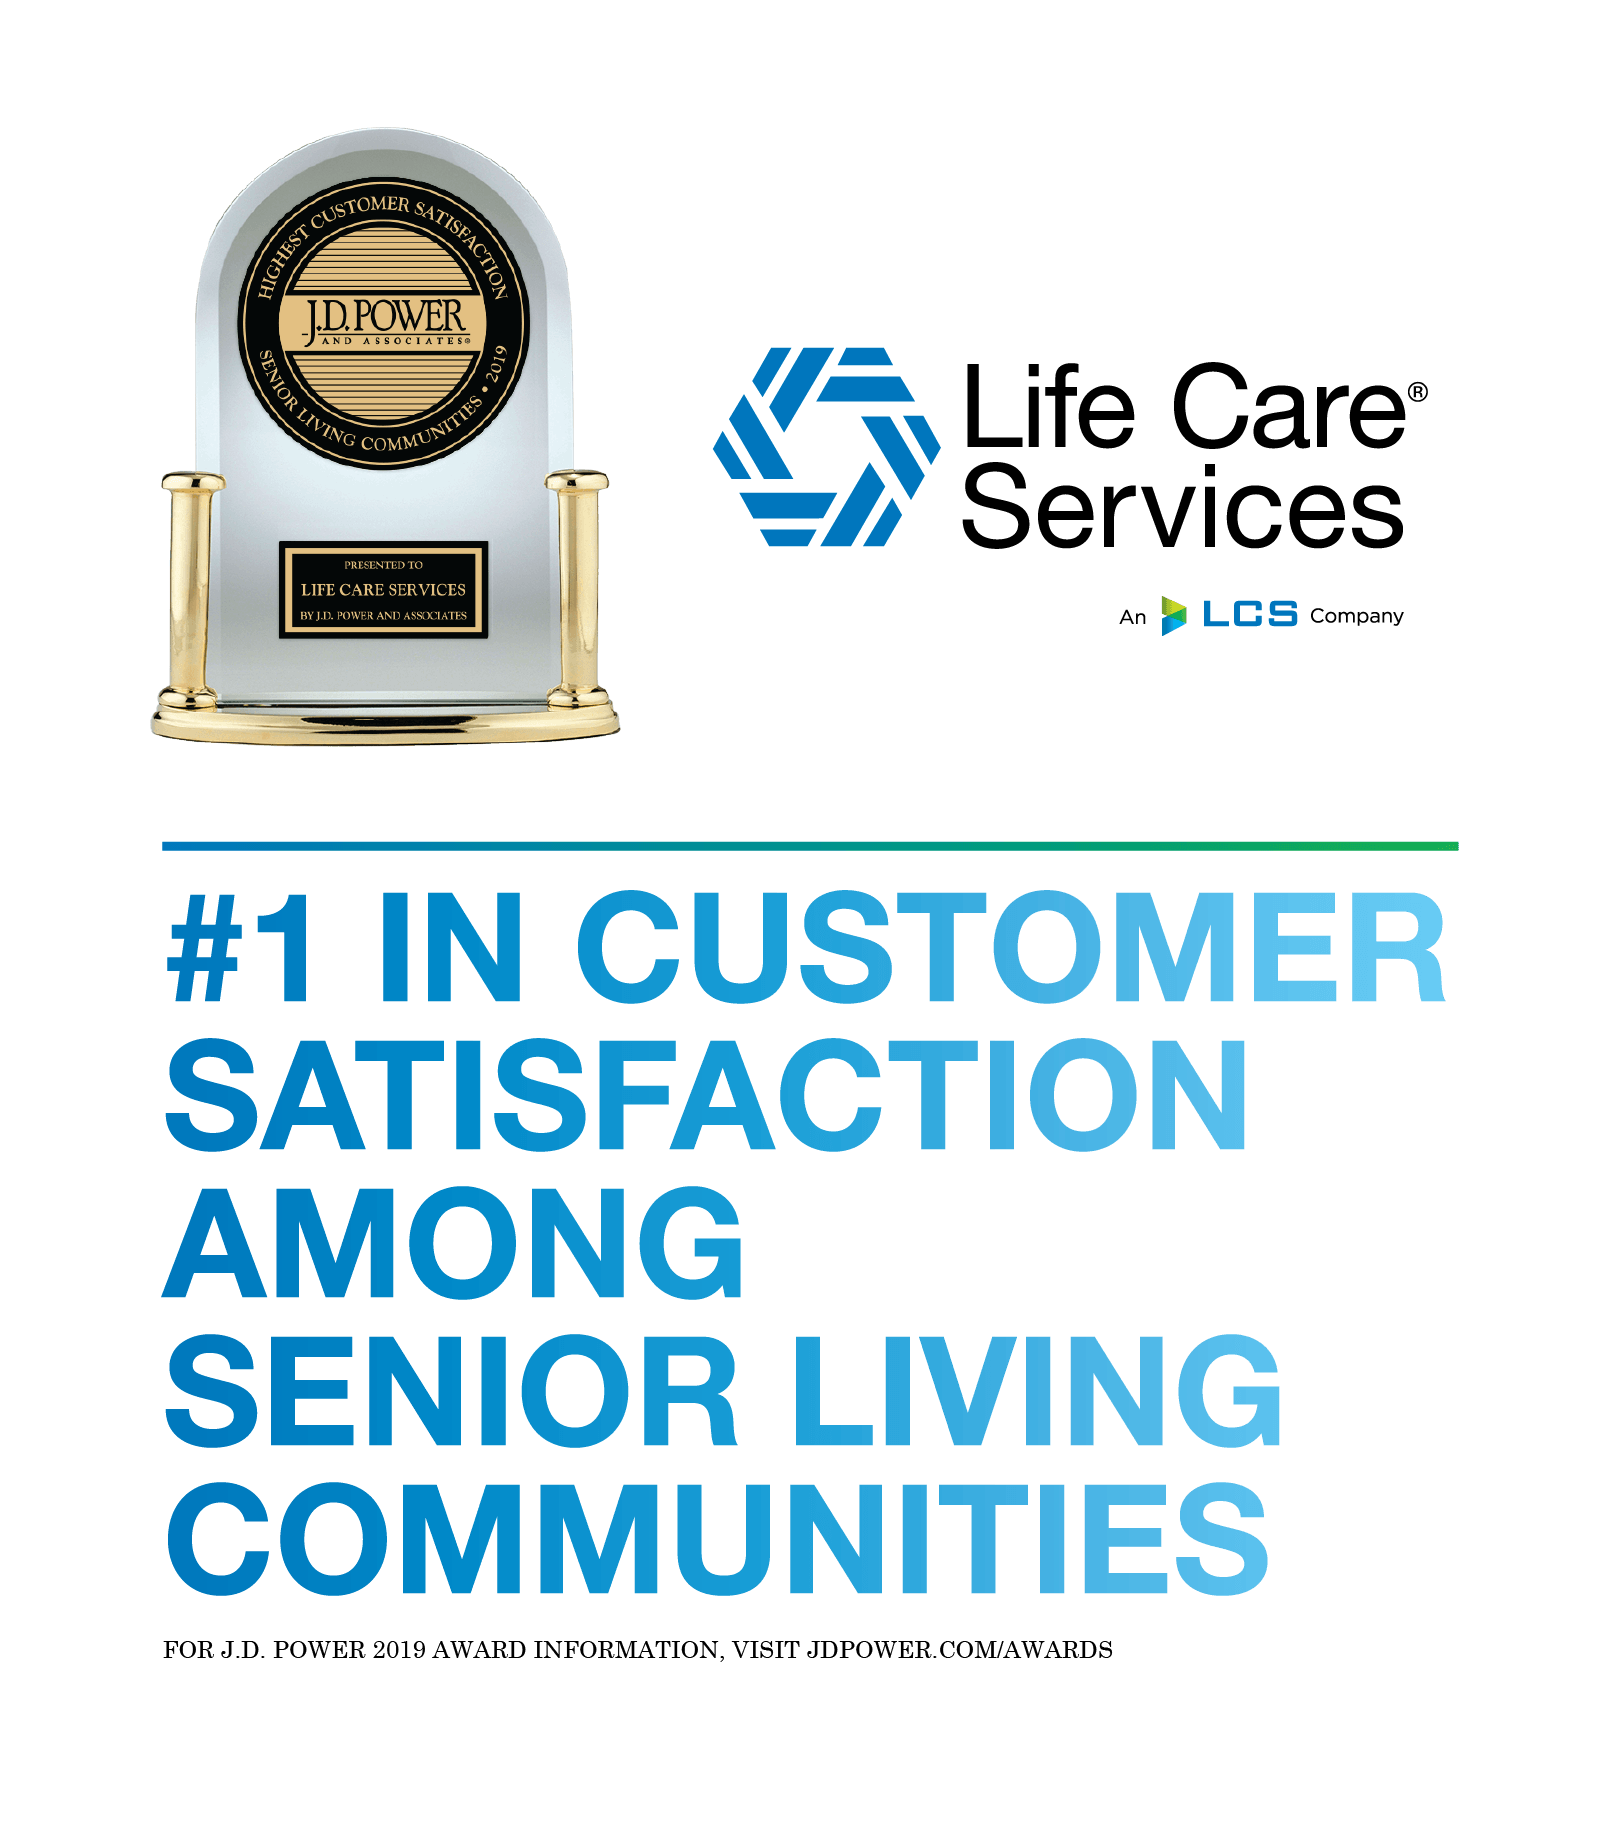 JD Power and Life Care Services logos